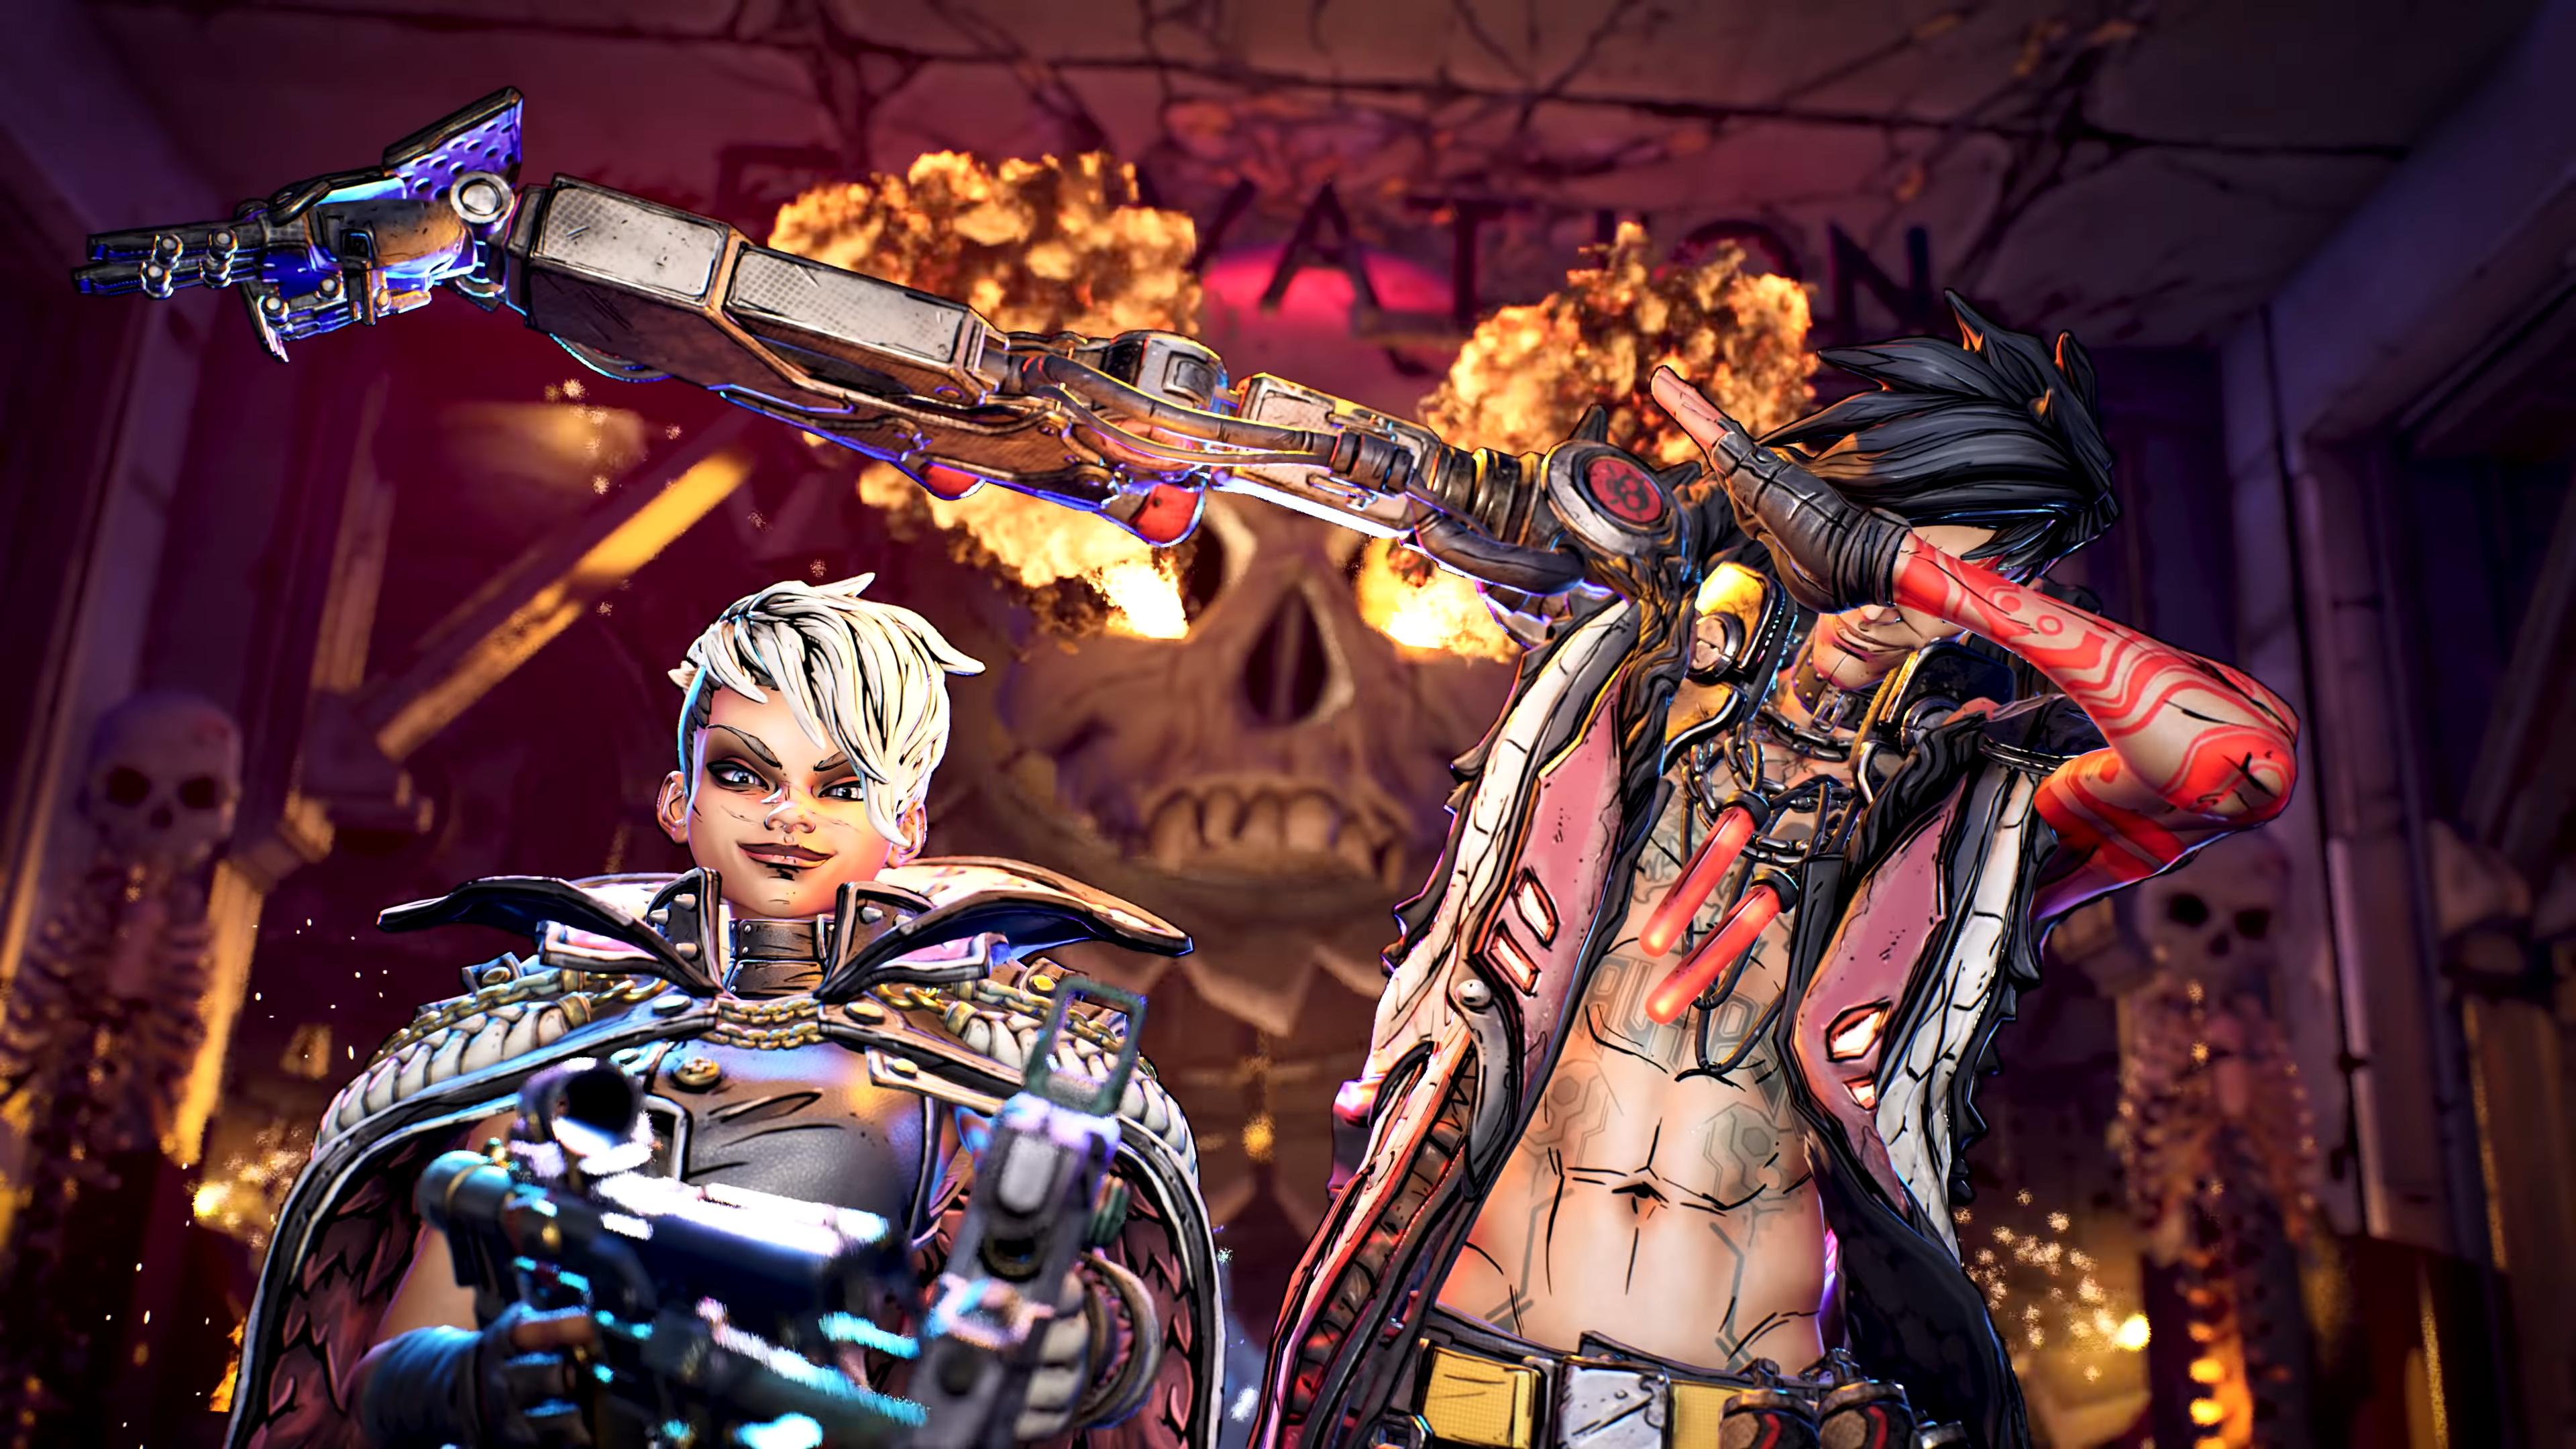 Borderlands 3 Patch Removes Screaming From Boss Who Screamed Too Much